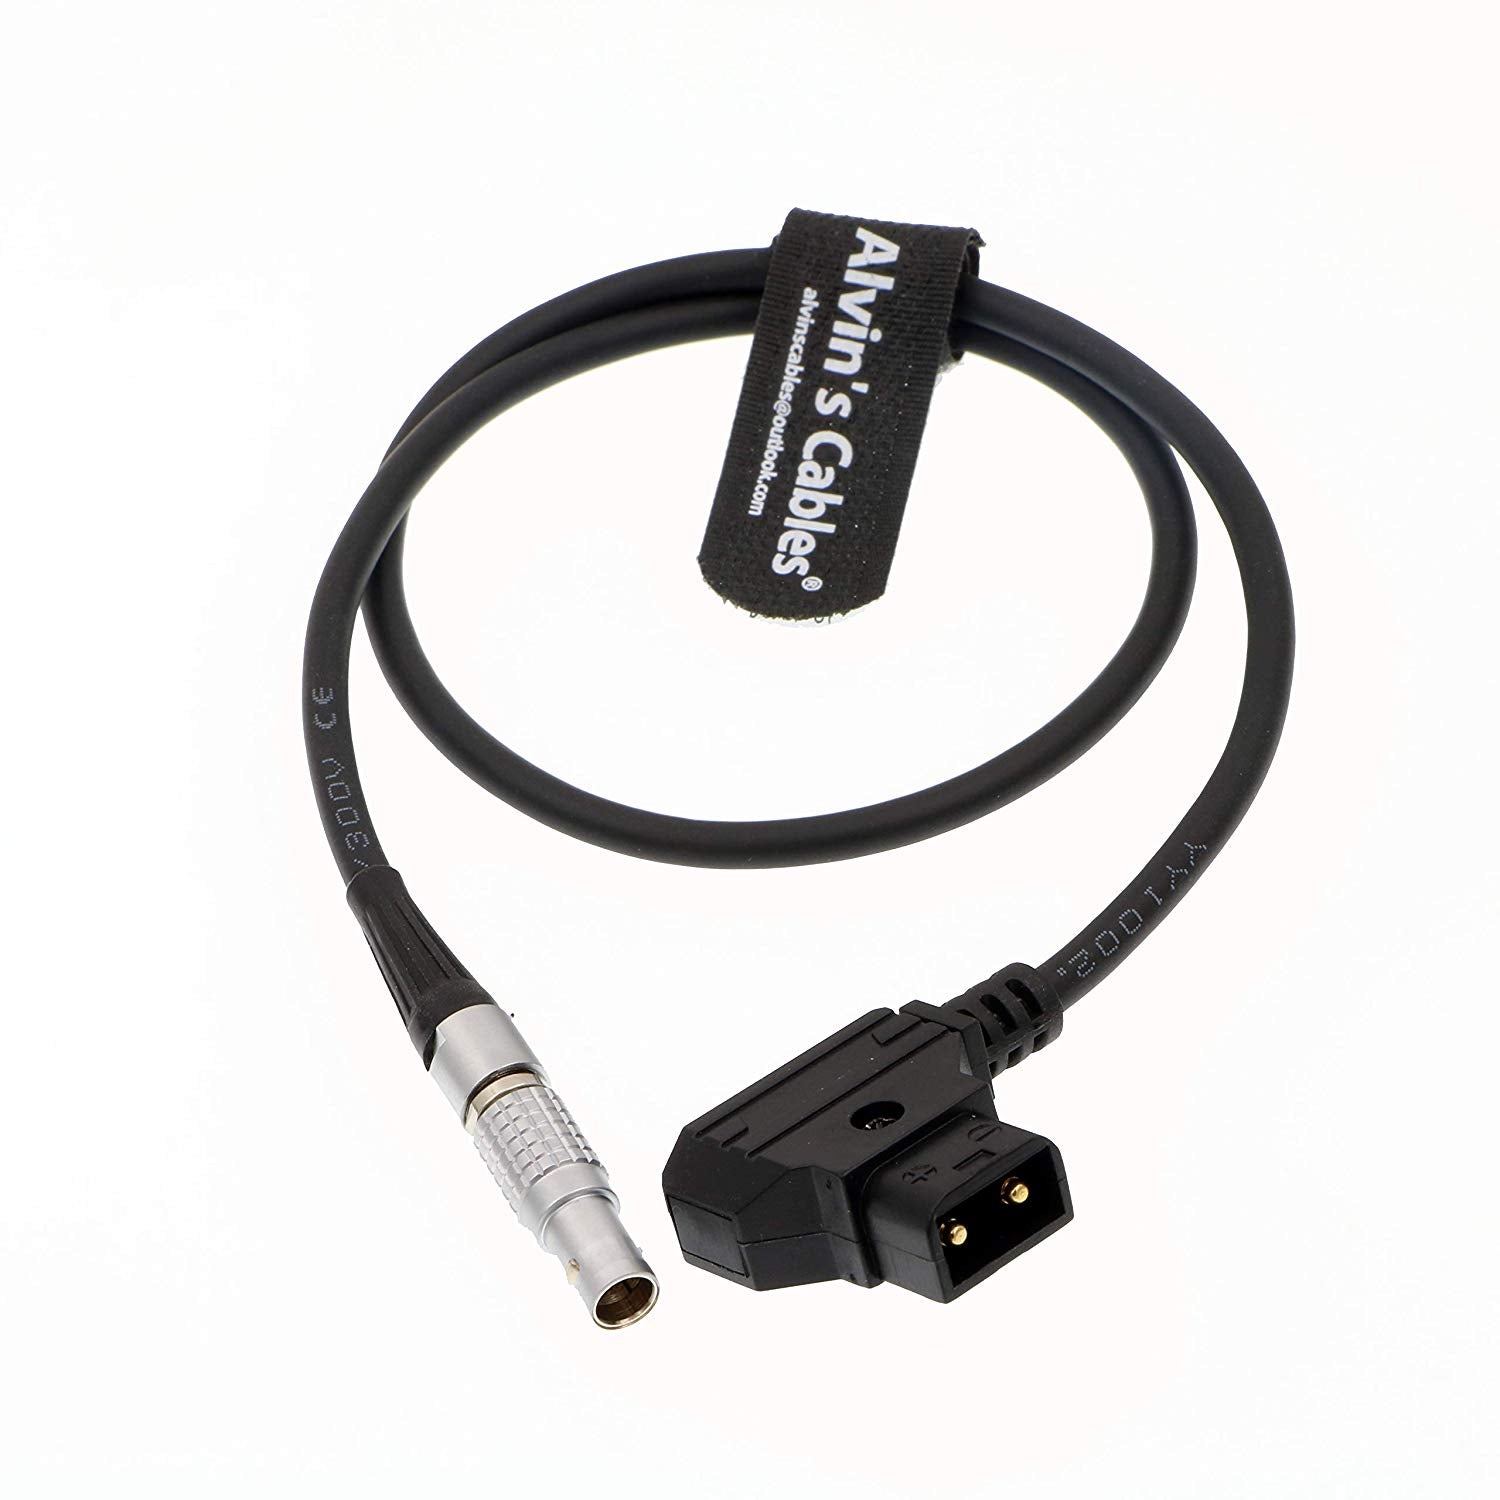 Alvin's Cables Motor Power Supply Cable for DJI Follow Focus System FGG 0B 6 Pin Male to D Tap